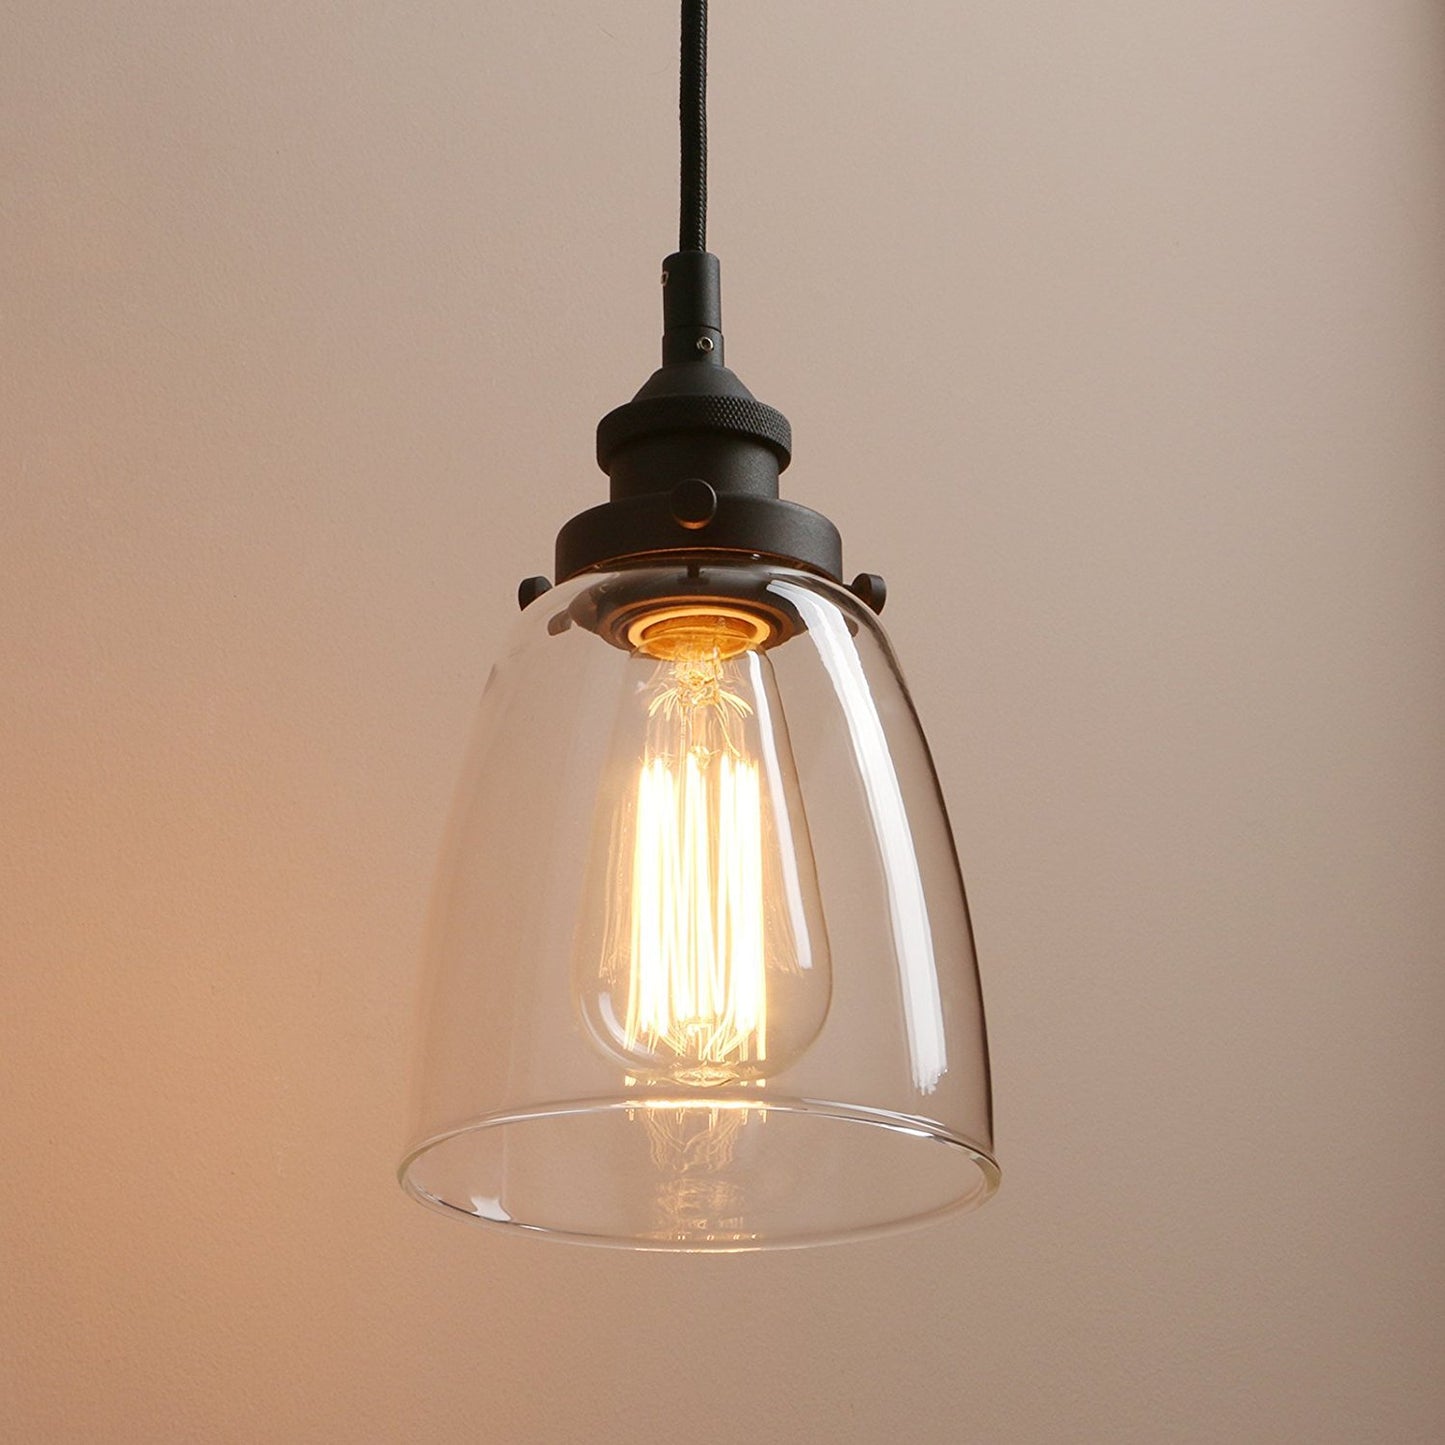 Industrial Small Hanging Light